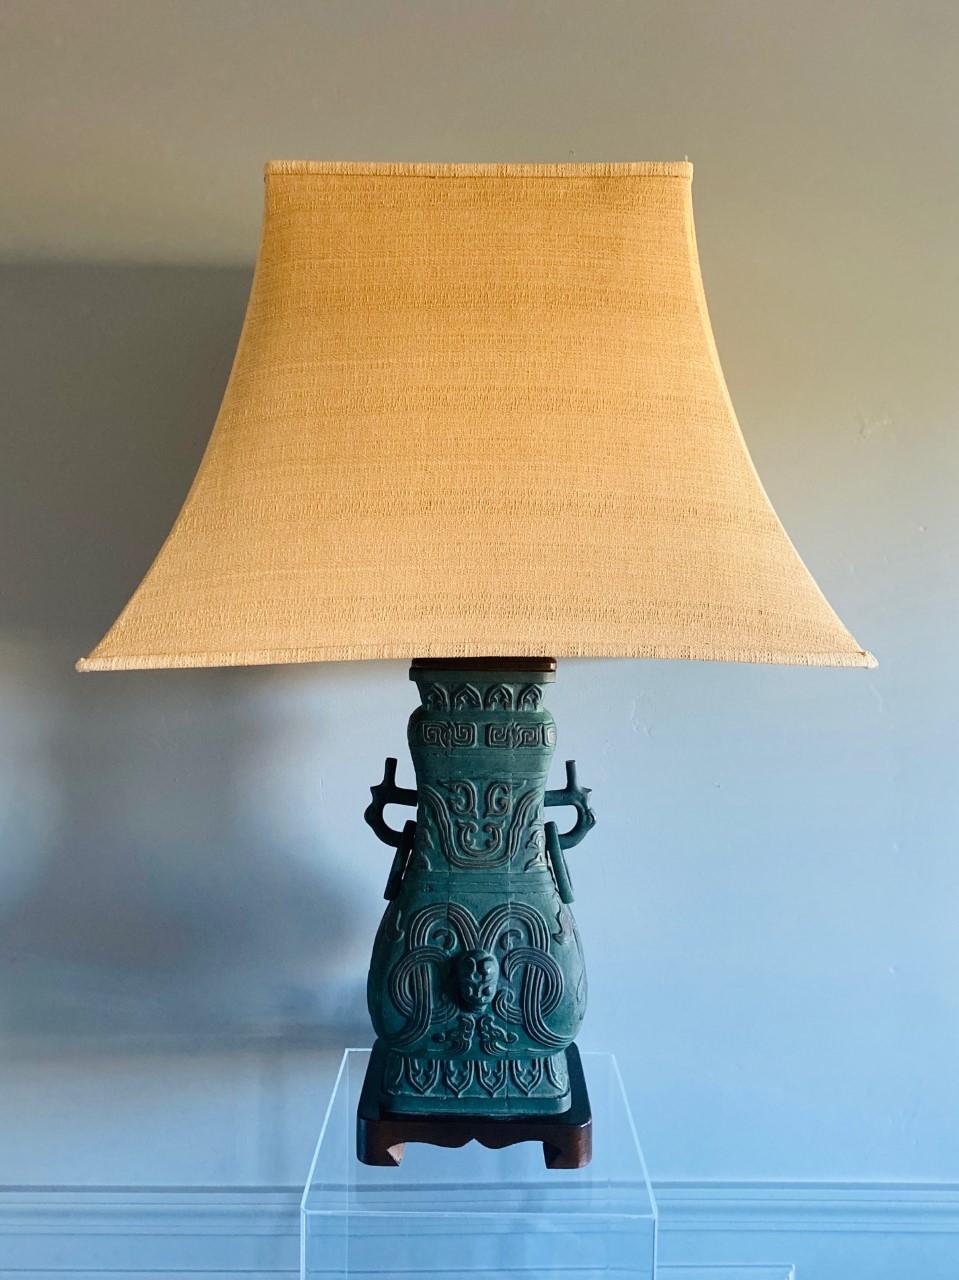 Beautiful vintage chinoiserie table lamp, Italian, midcentury. This sculptural piece is urn shaped from cast bronze and is mounted on a carved wood base. The structure is covered in a low relief chinoiserie design with a beautiful patina. The table